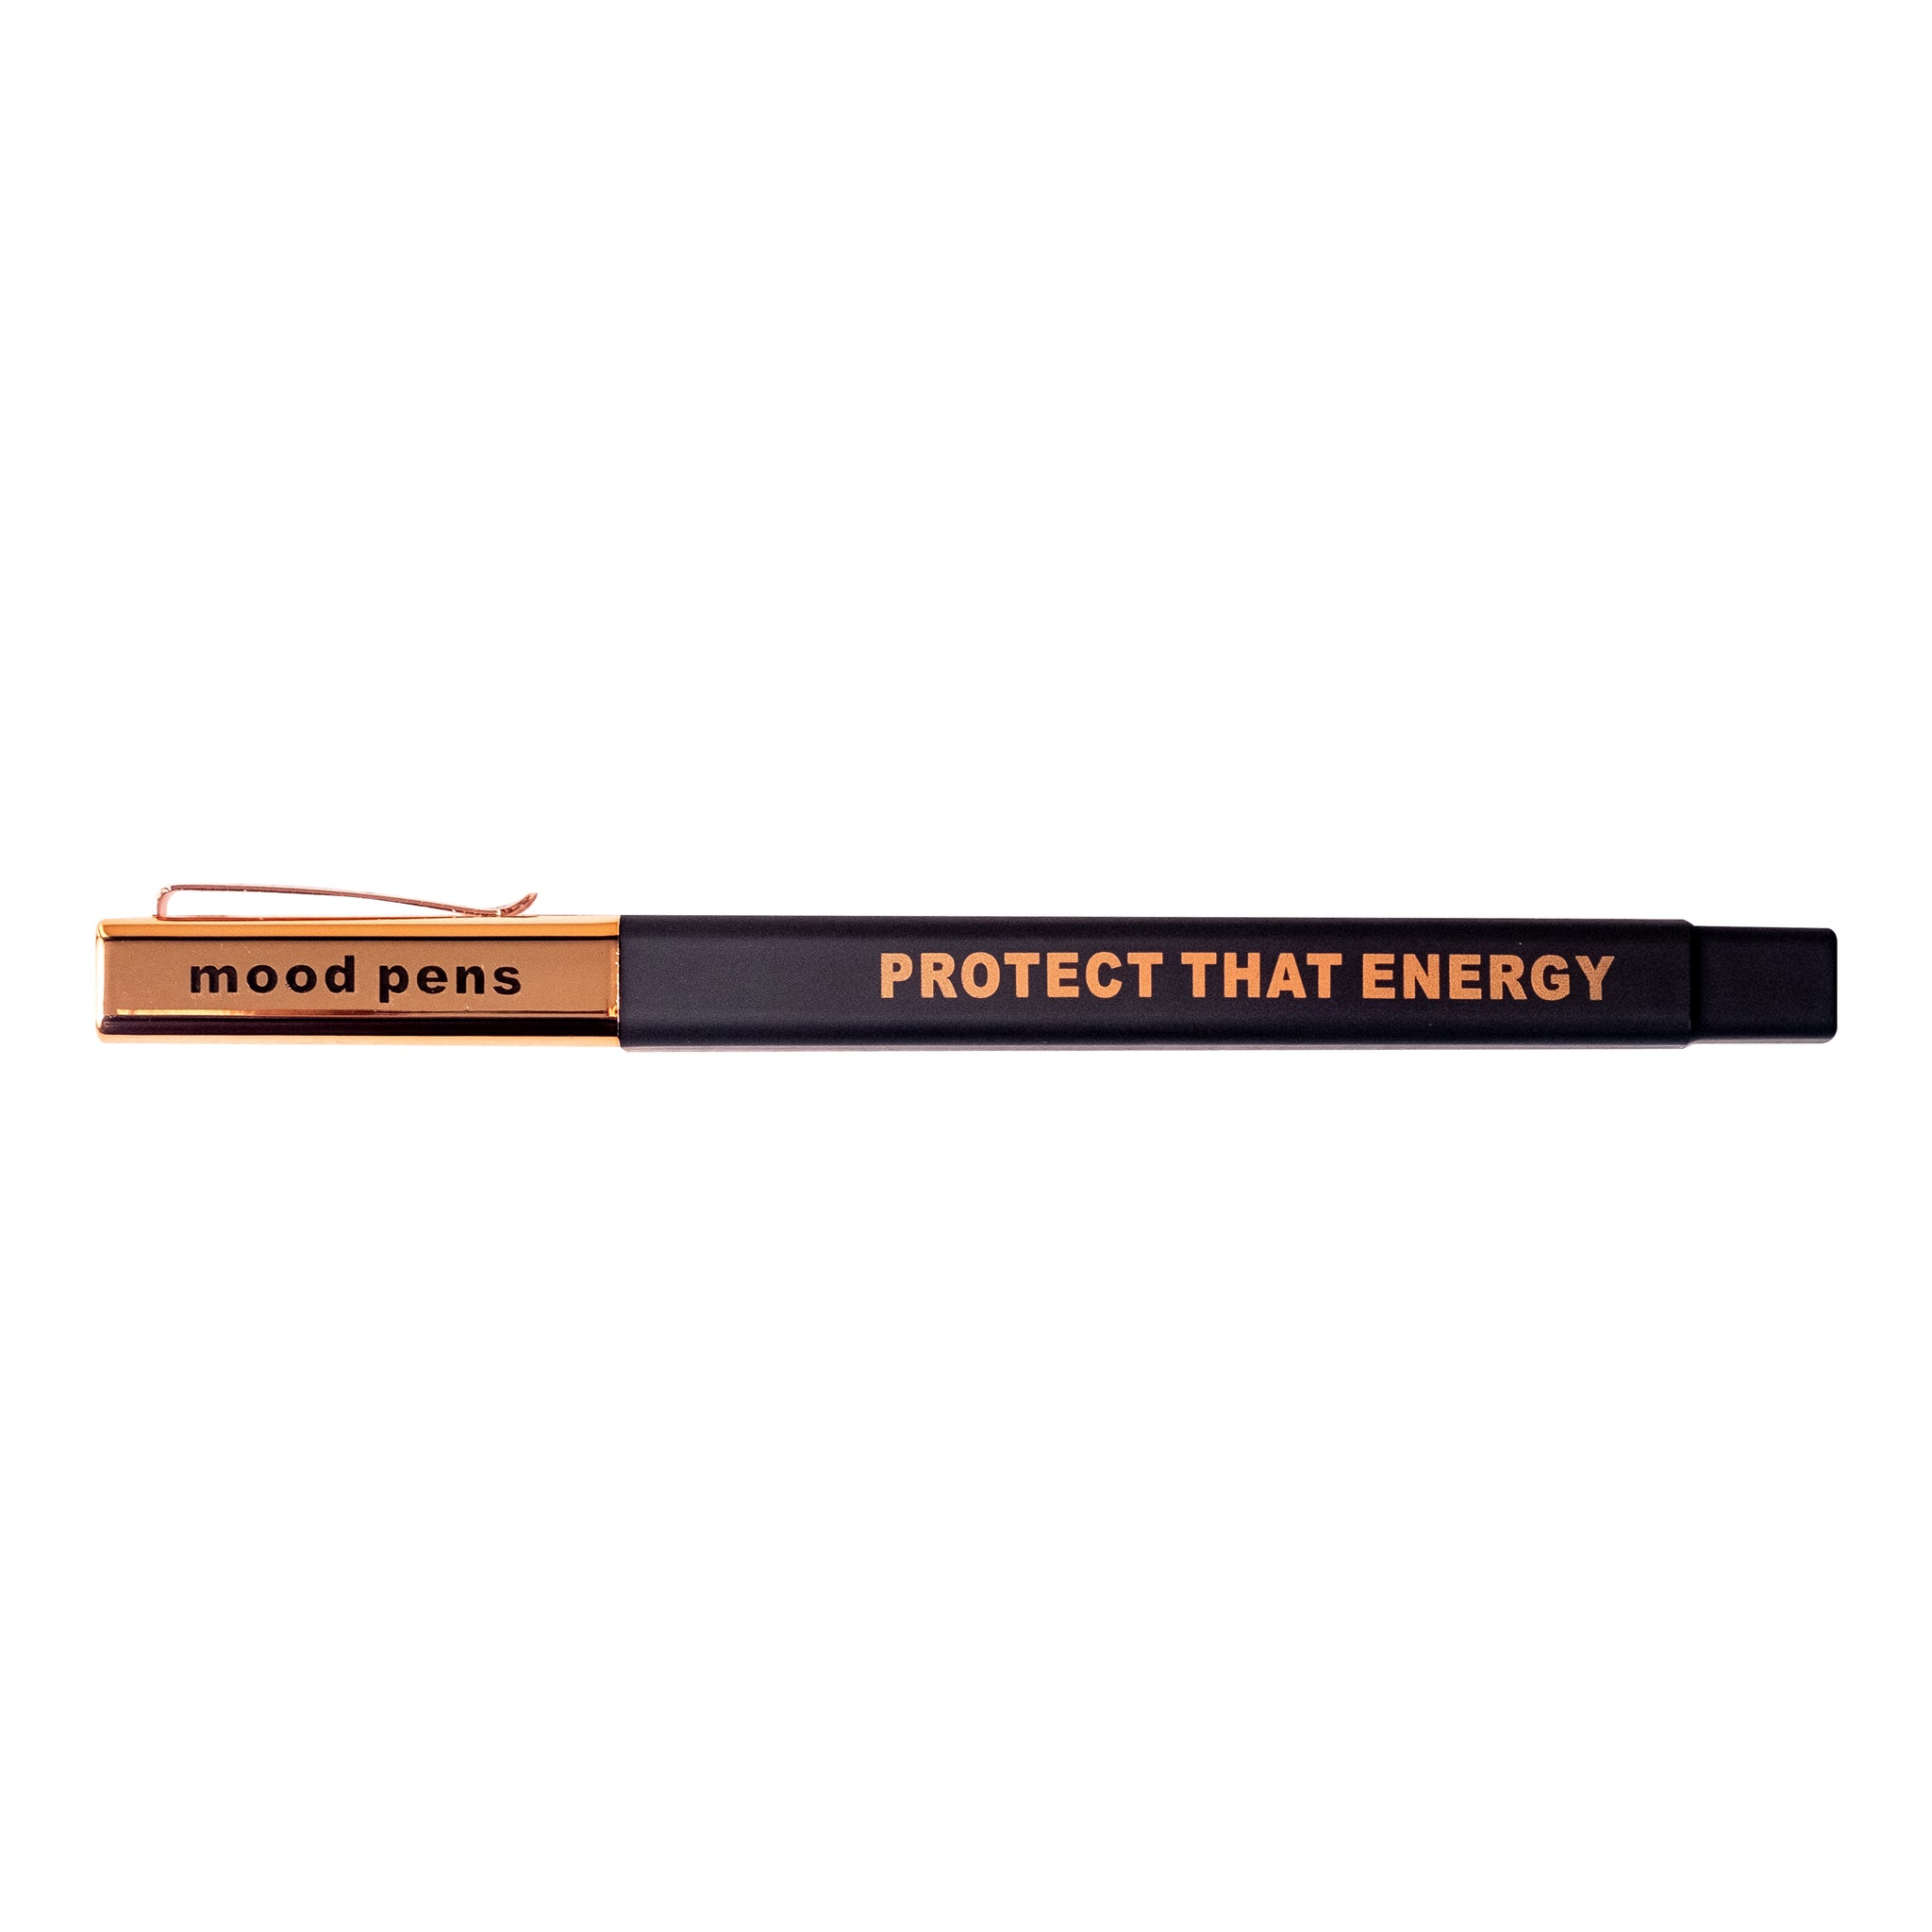 Rose Gold Mood Pens Premium Ballpoint Pens, Smooth & Comfortable, Medium Point, Refillable, 1.0mm, Black or Blue Ink, Positive Thoughts for Mental Health (12-Pack)